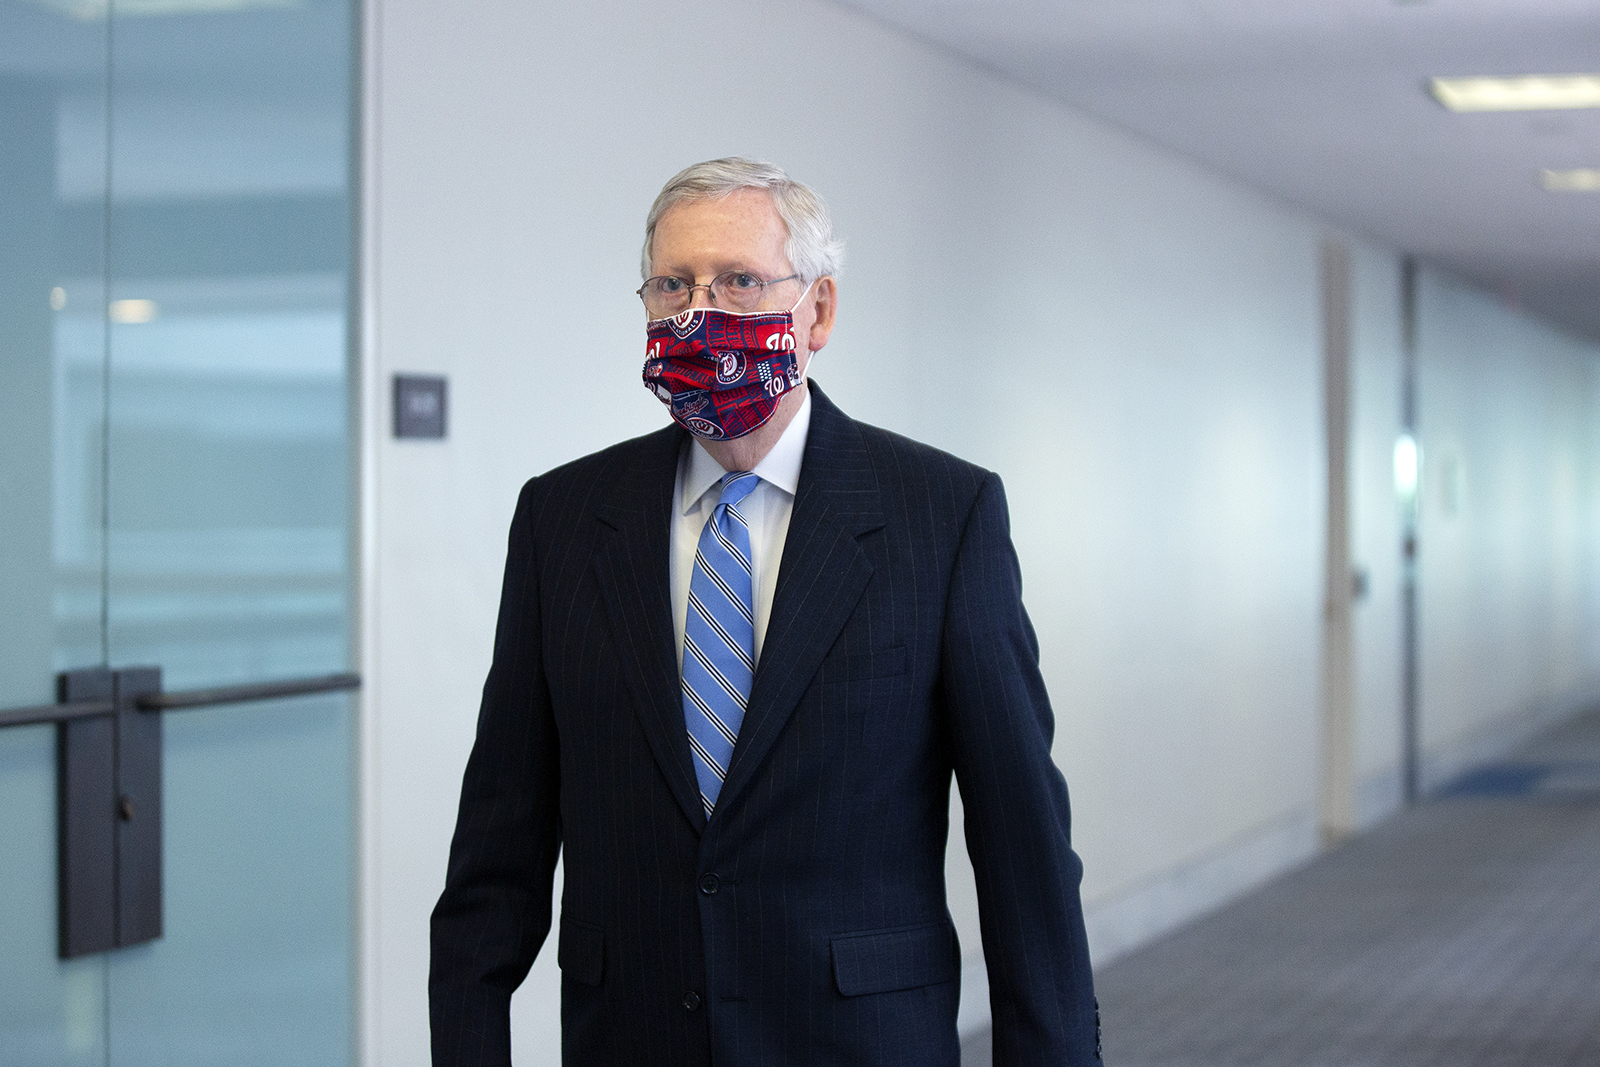 Senate Majority Leader Mitch McConnell, wears a protective mask while arriving to a Senate Republican luncheon on Capitol Hill in Washington, DC on June 25.